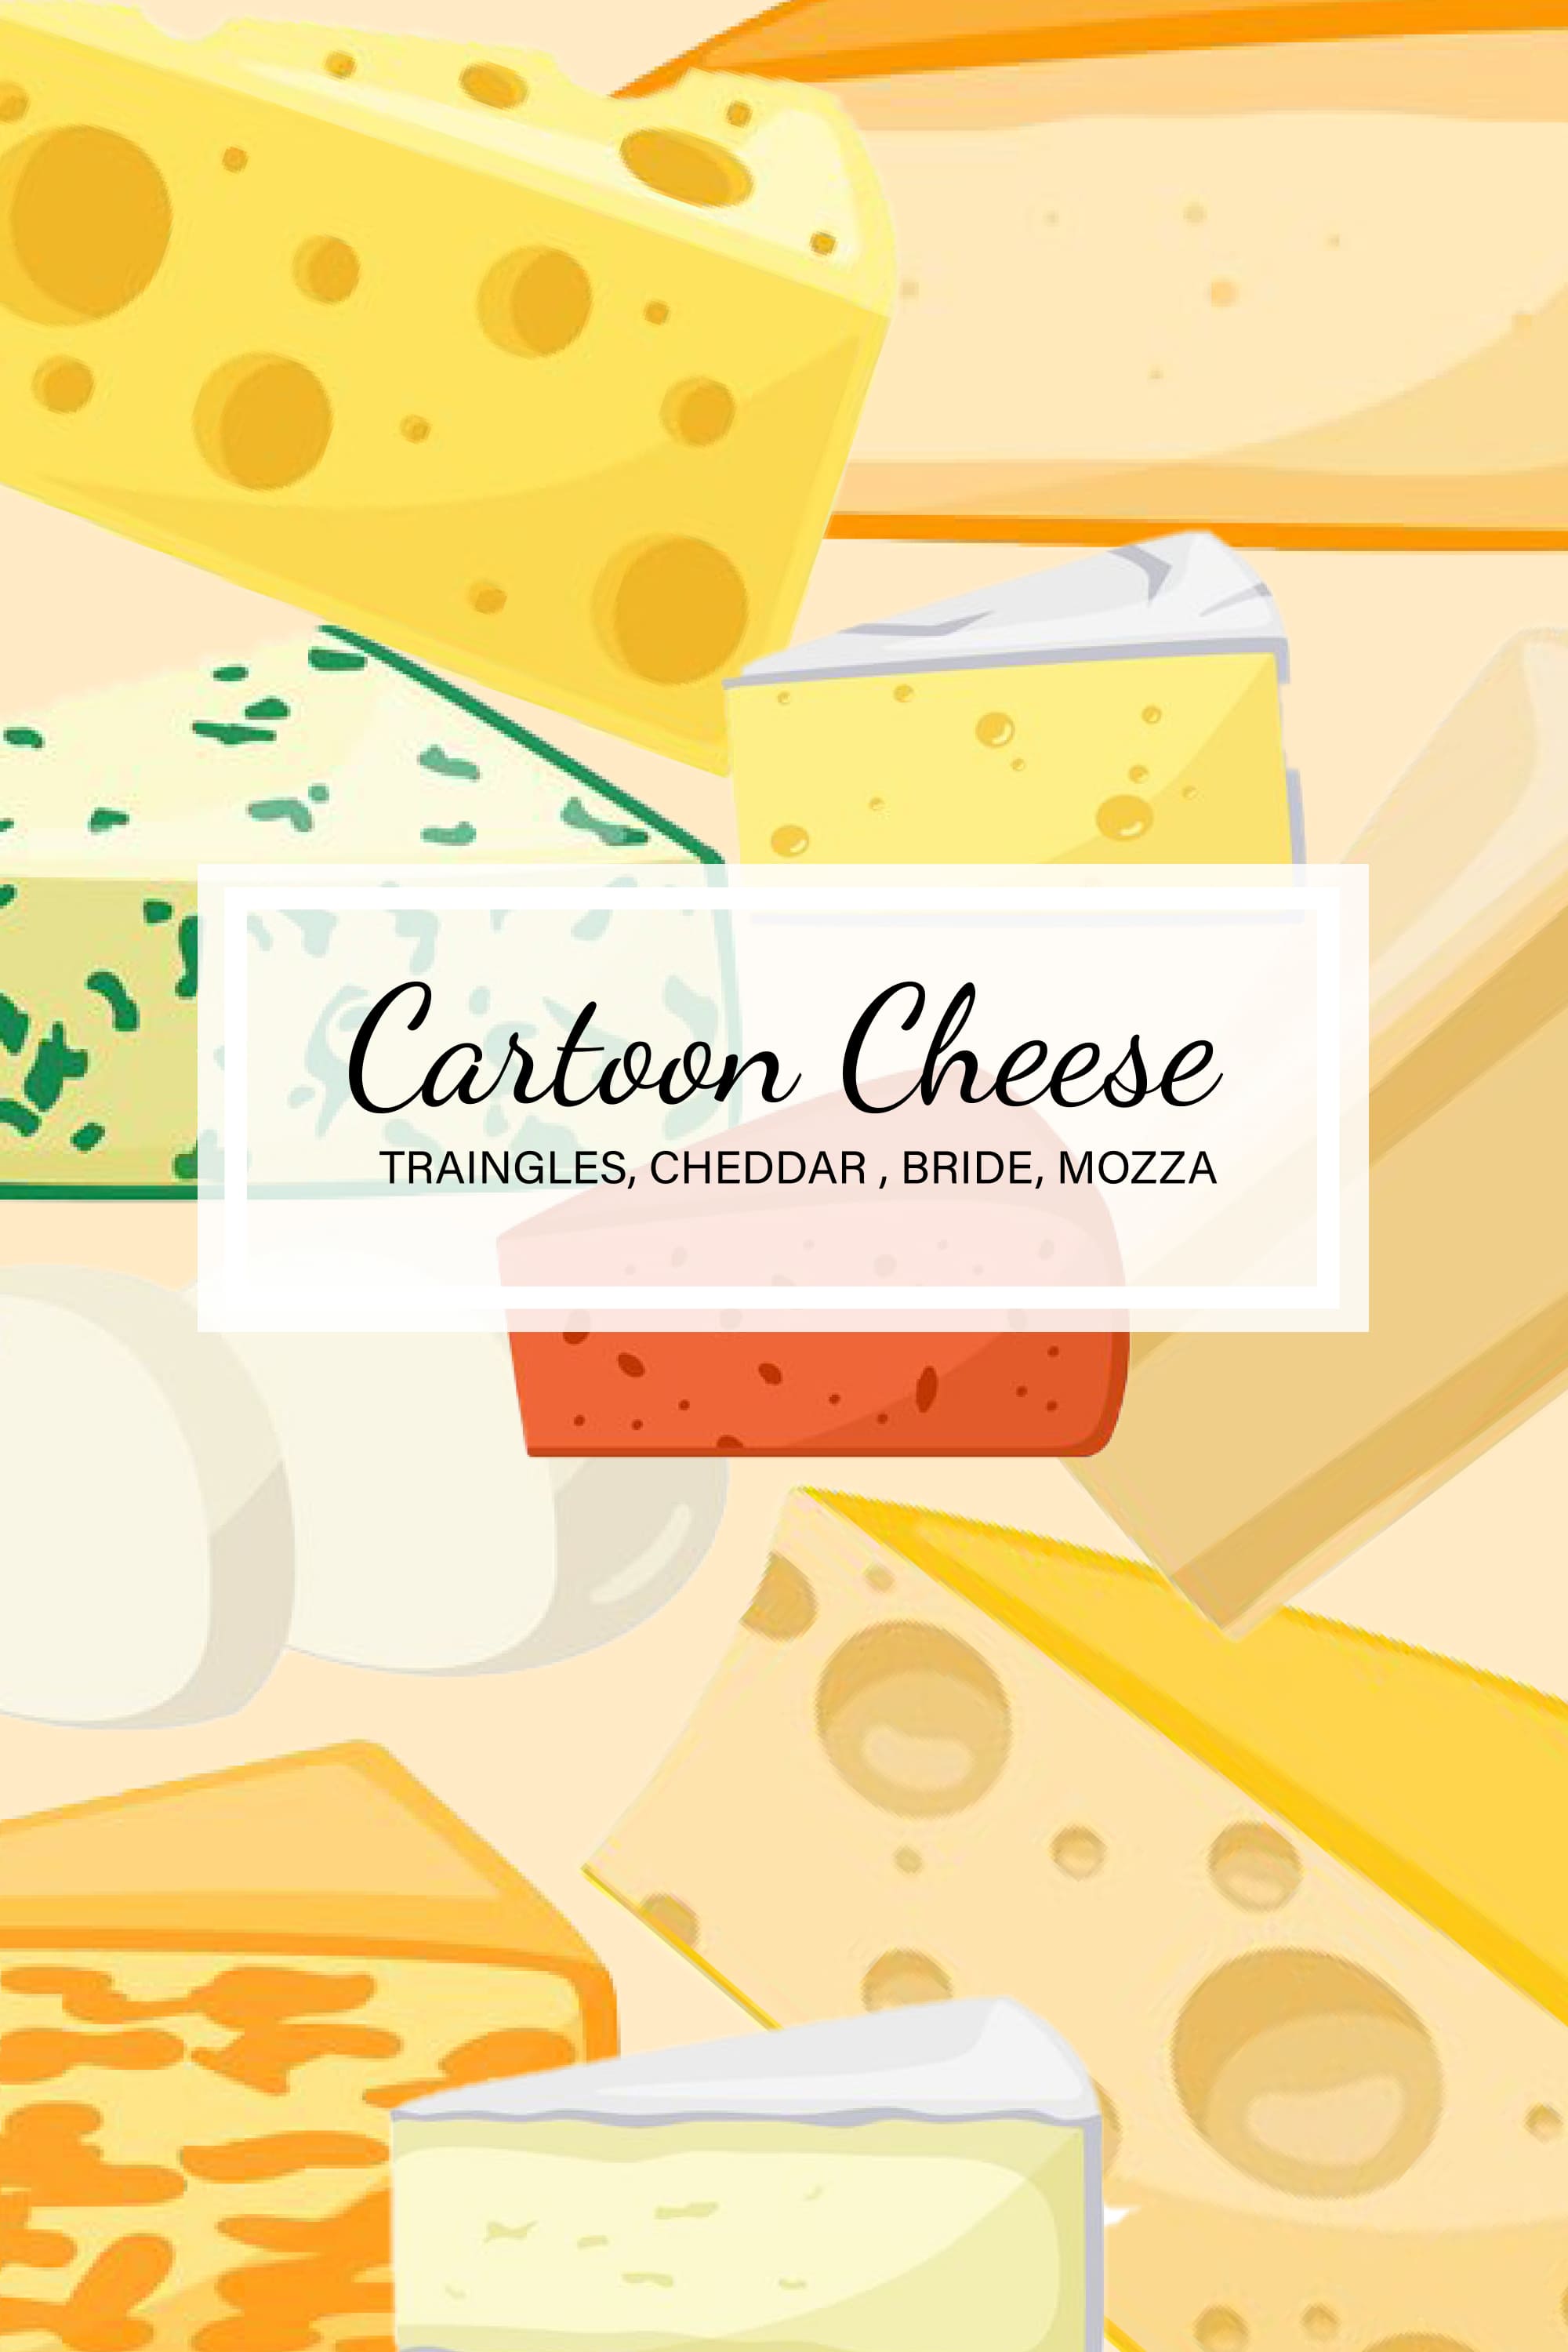 Bright image of different types of cheeses.